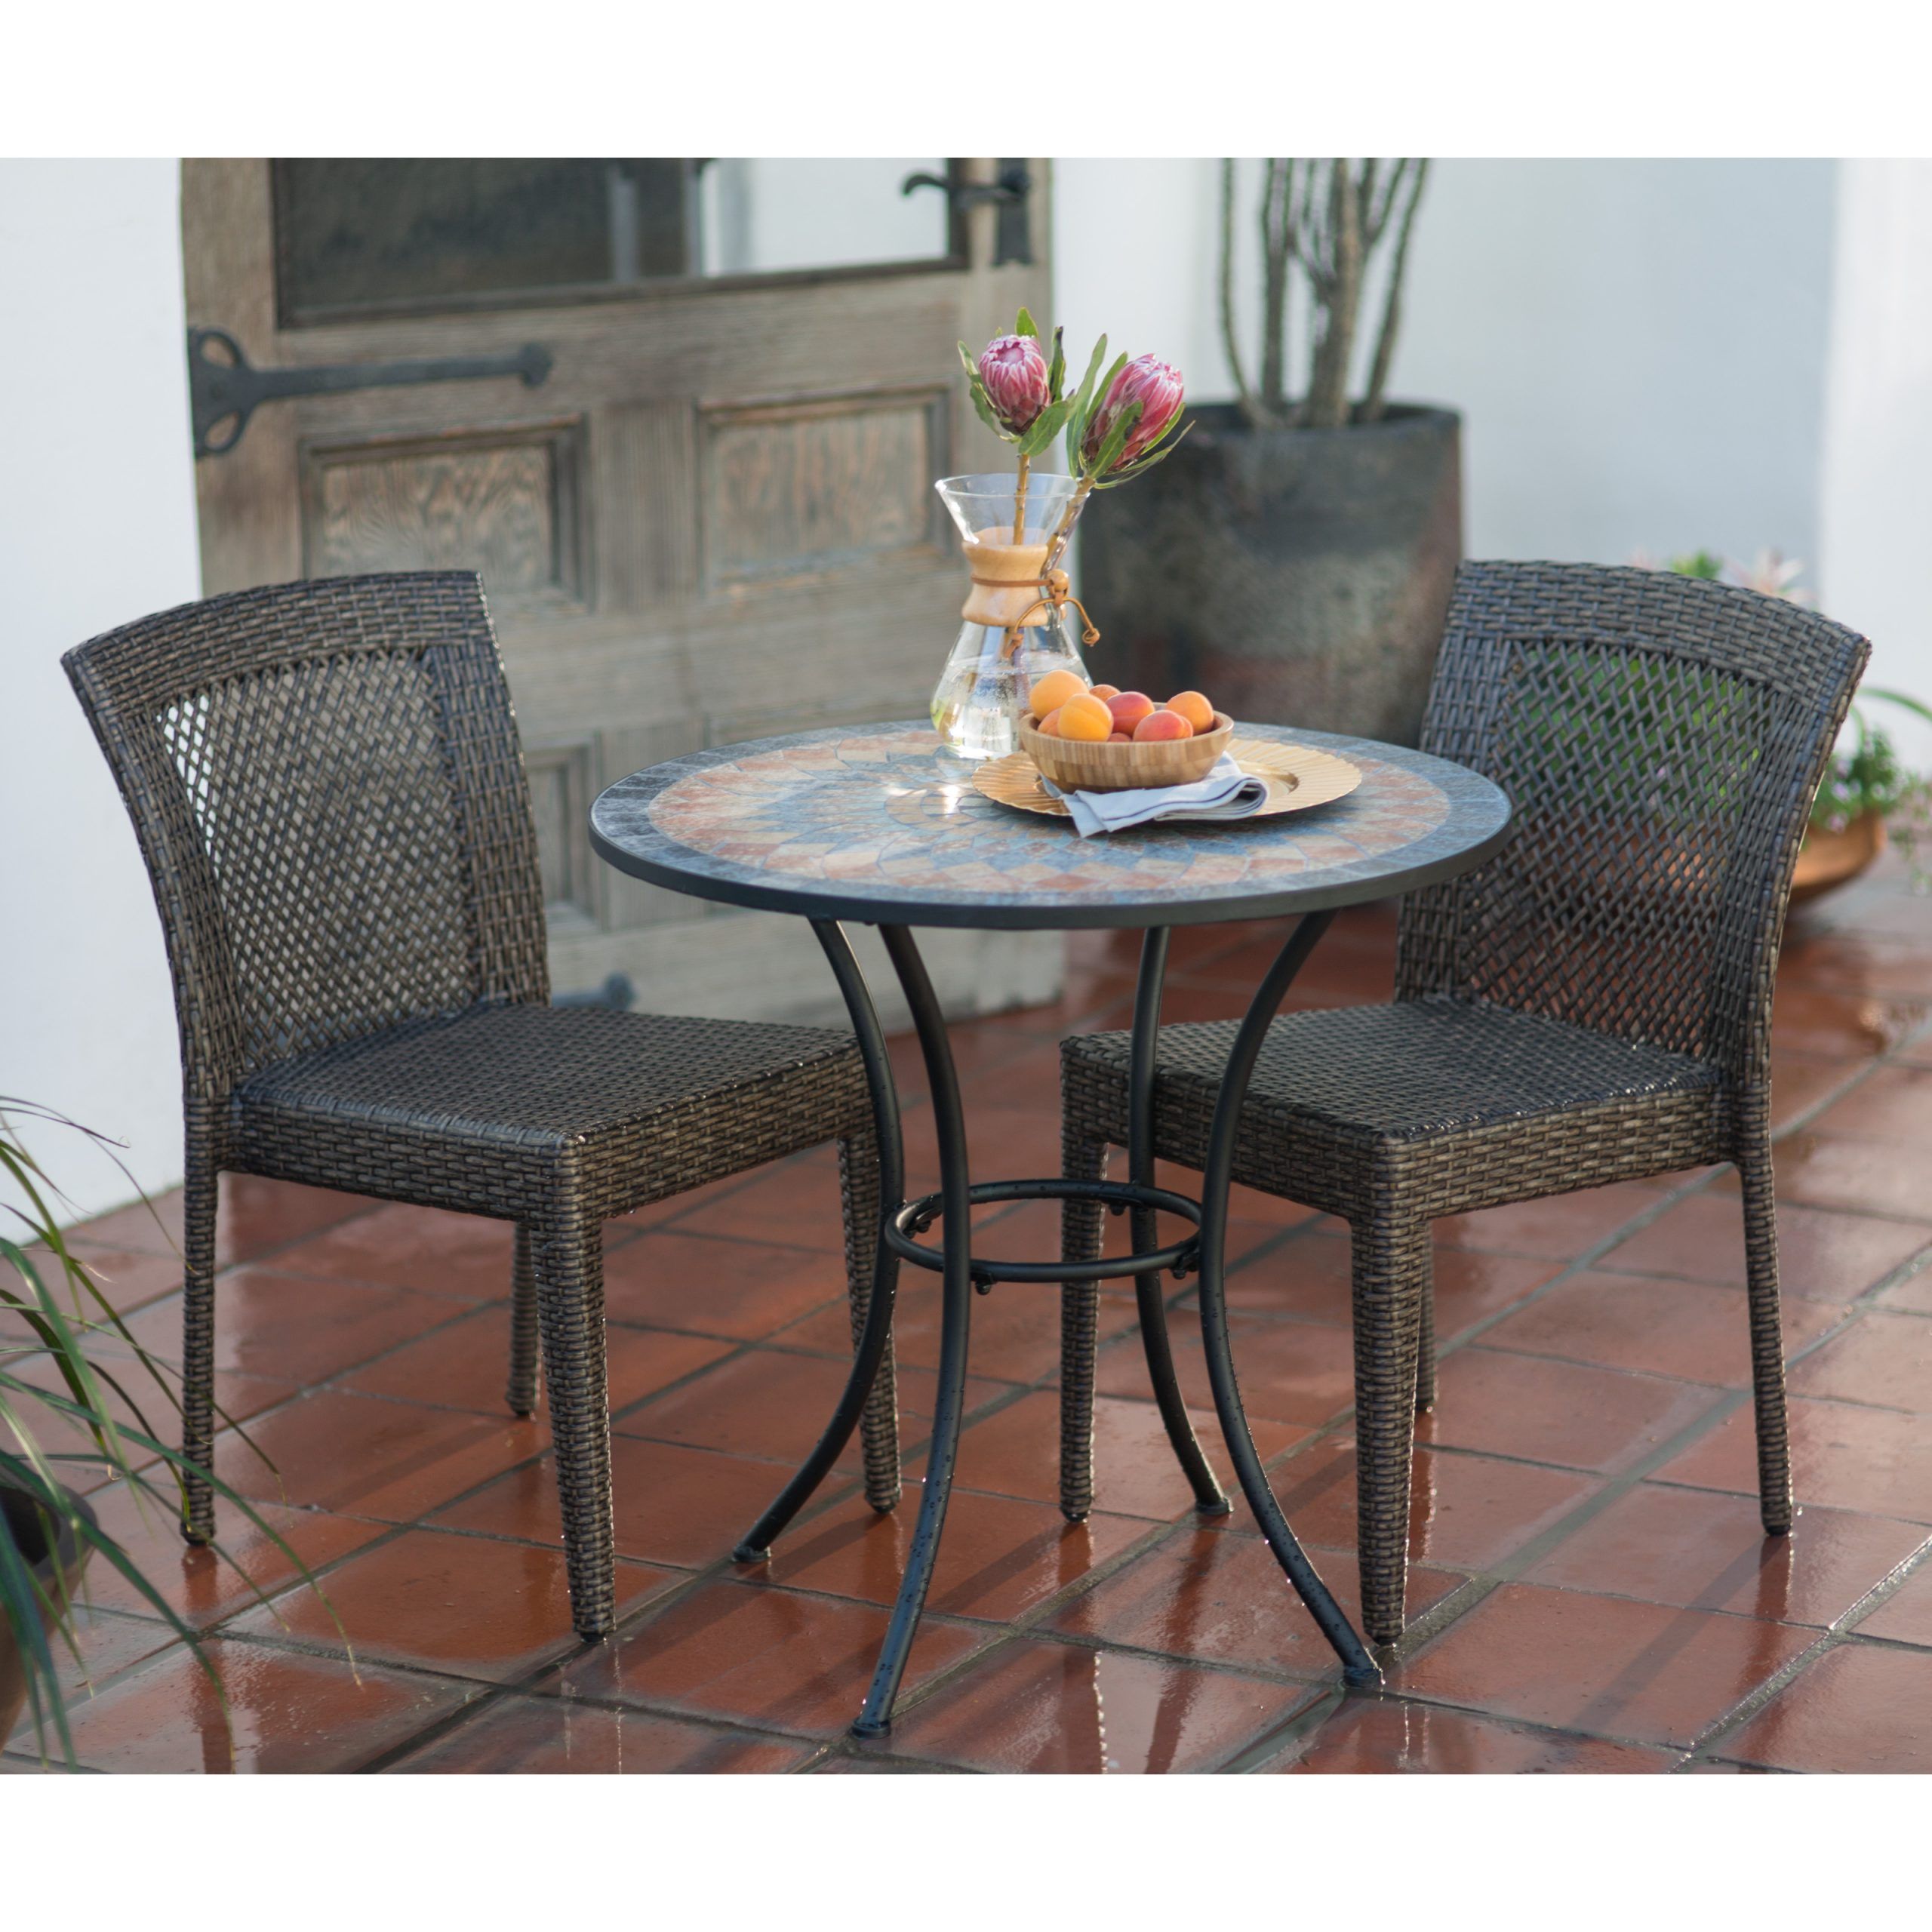 Belham Living Brisbane All Weather Wicker And Mosaic Patio Bistro Set In Favorite Outdoor Wicker Cafe Dining Sets (View 14 of 15)